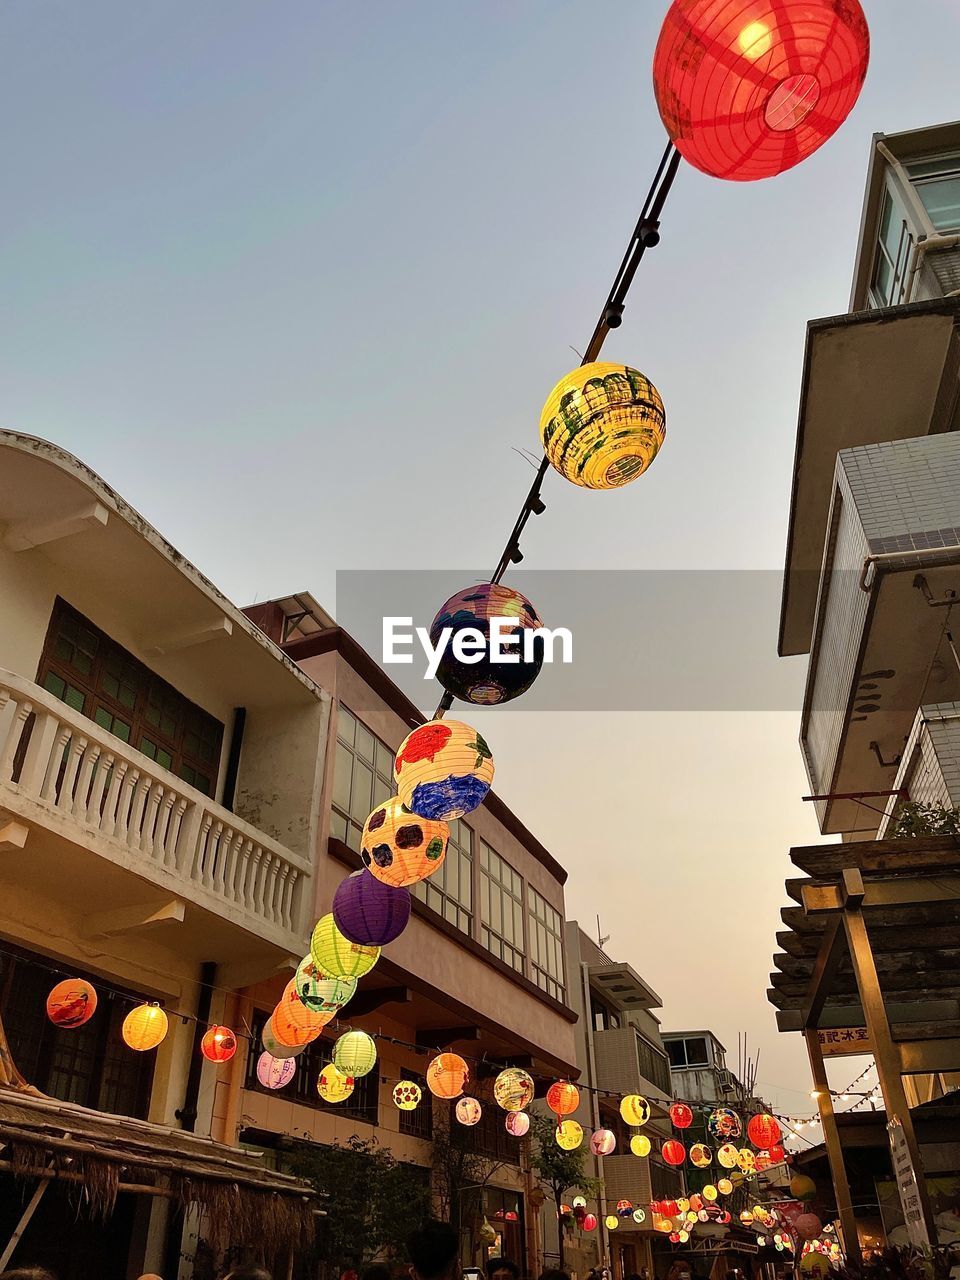 Celebrating mid autumn in hk, lanterns were hanged on the streets of tai o. low angle with bldg, sky